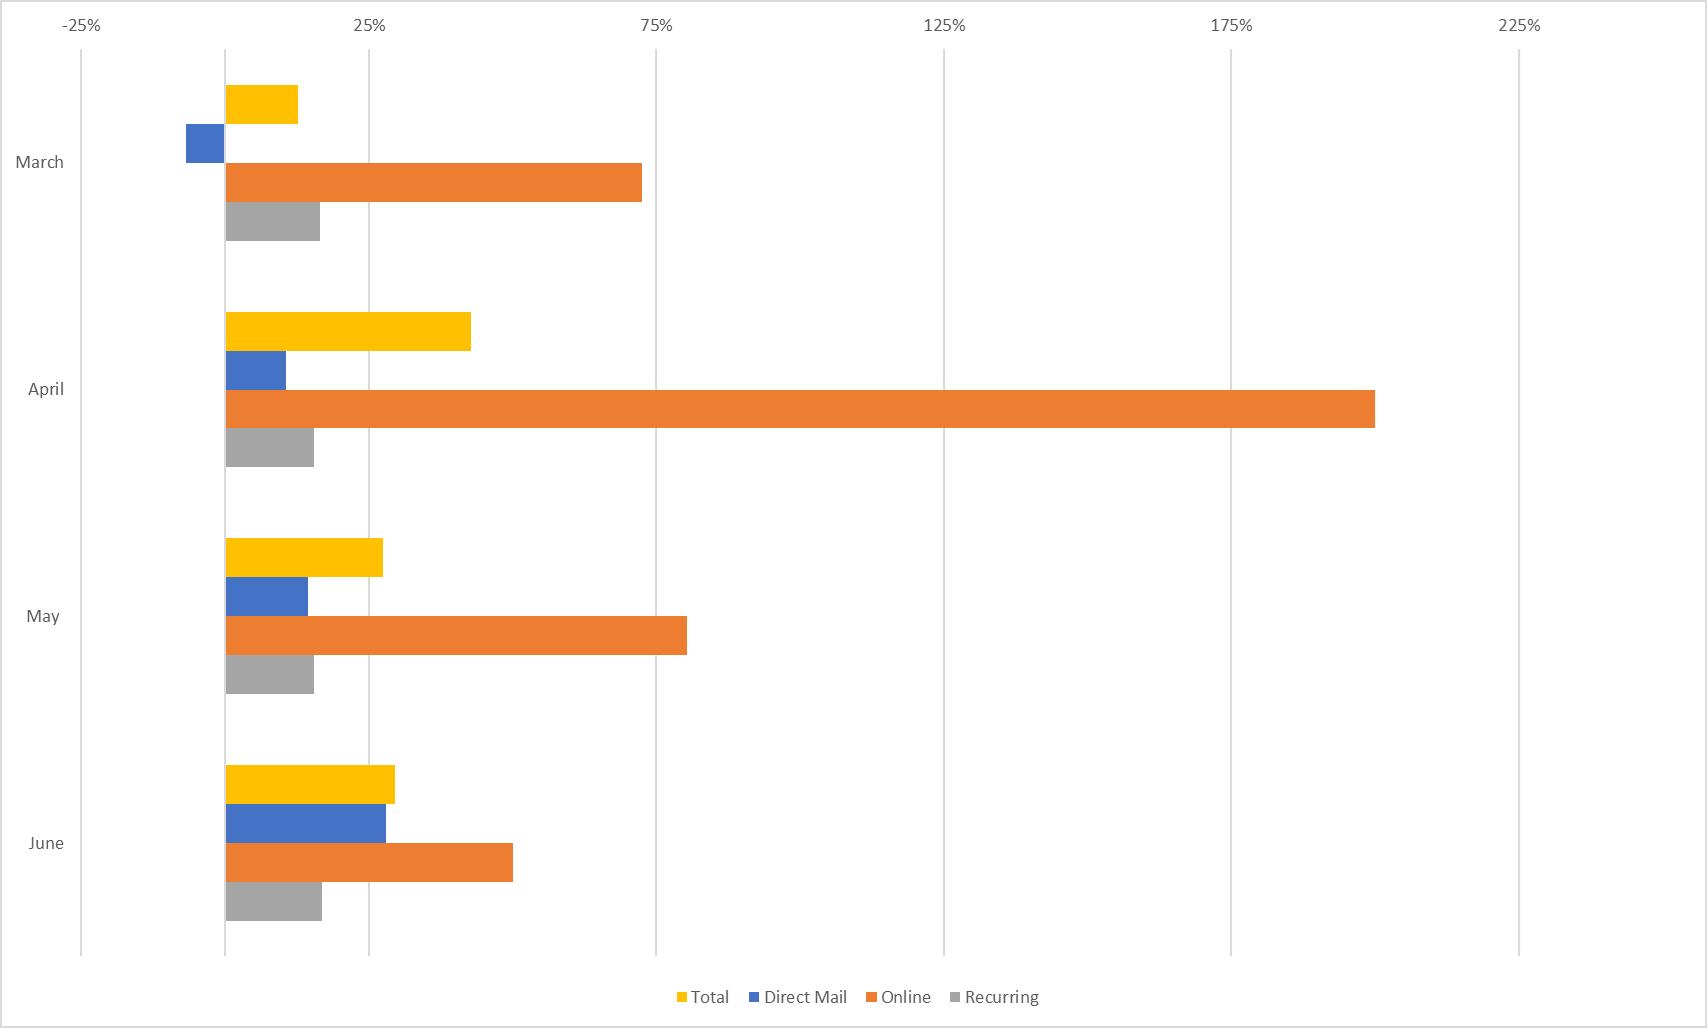 Percent increase in channel revenue by month